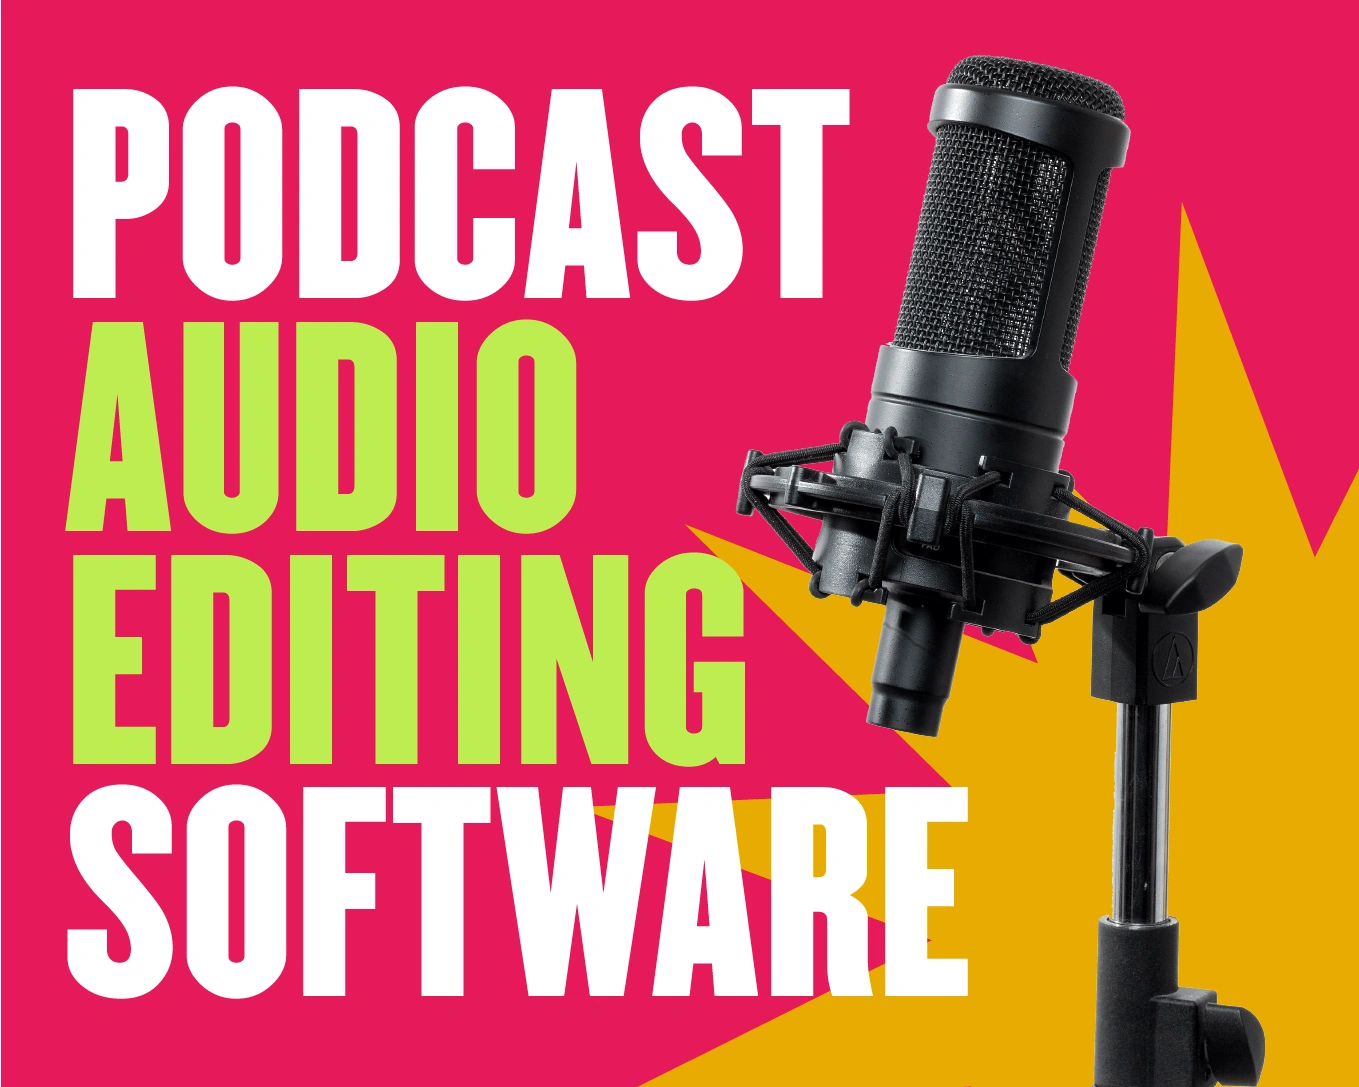 The Podcast Editing Software